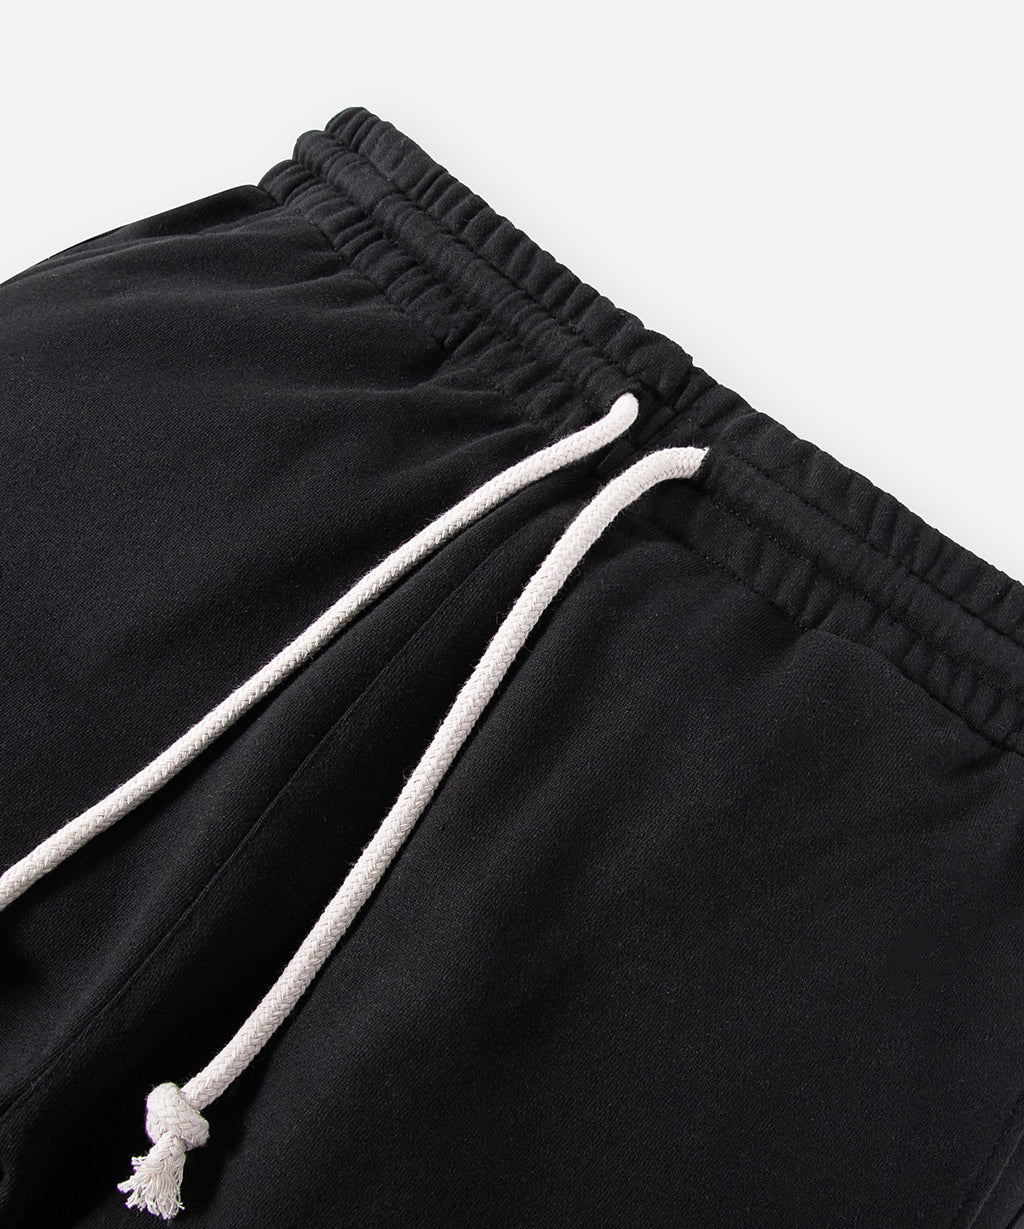  Elasticated waistband and drawcord on Paper Planes Crest Sweatpant, color Black.